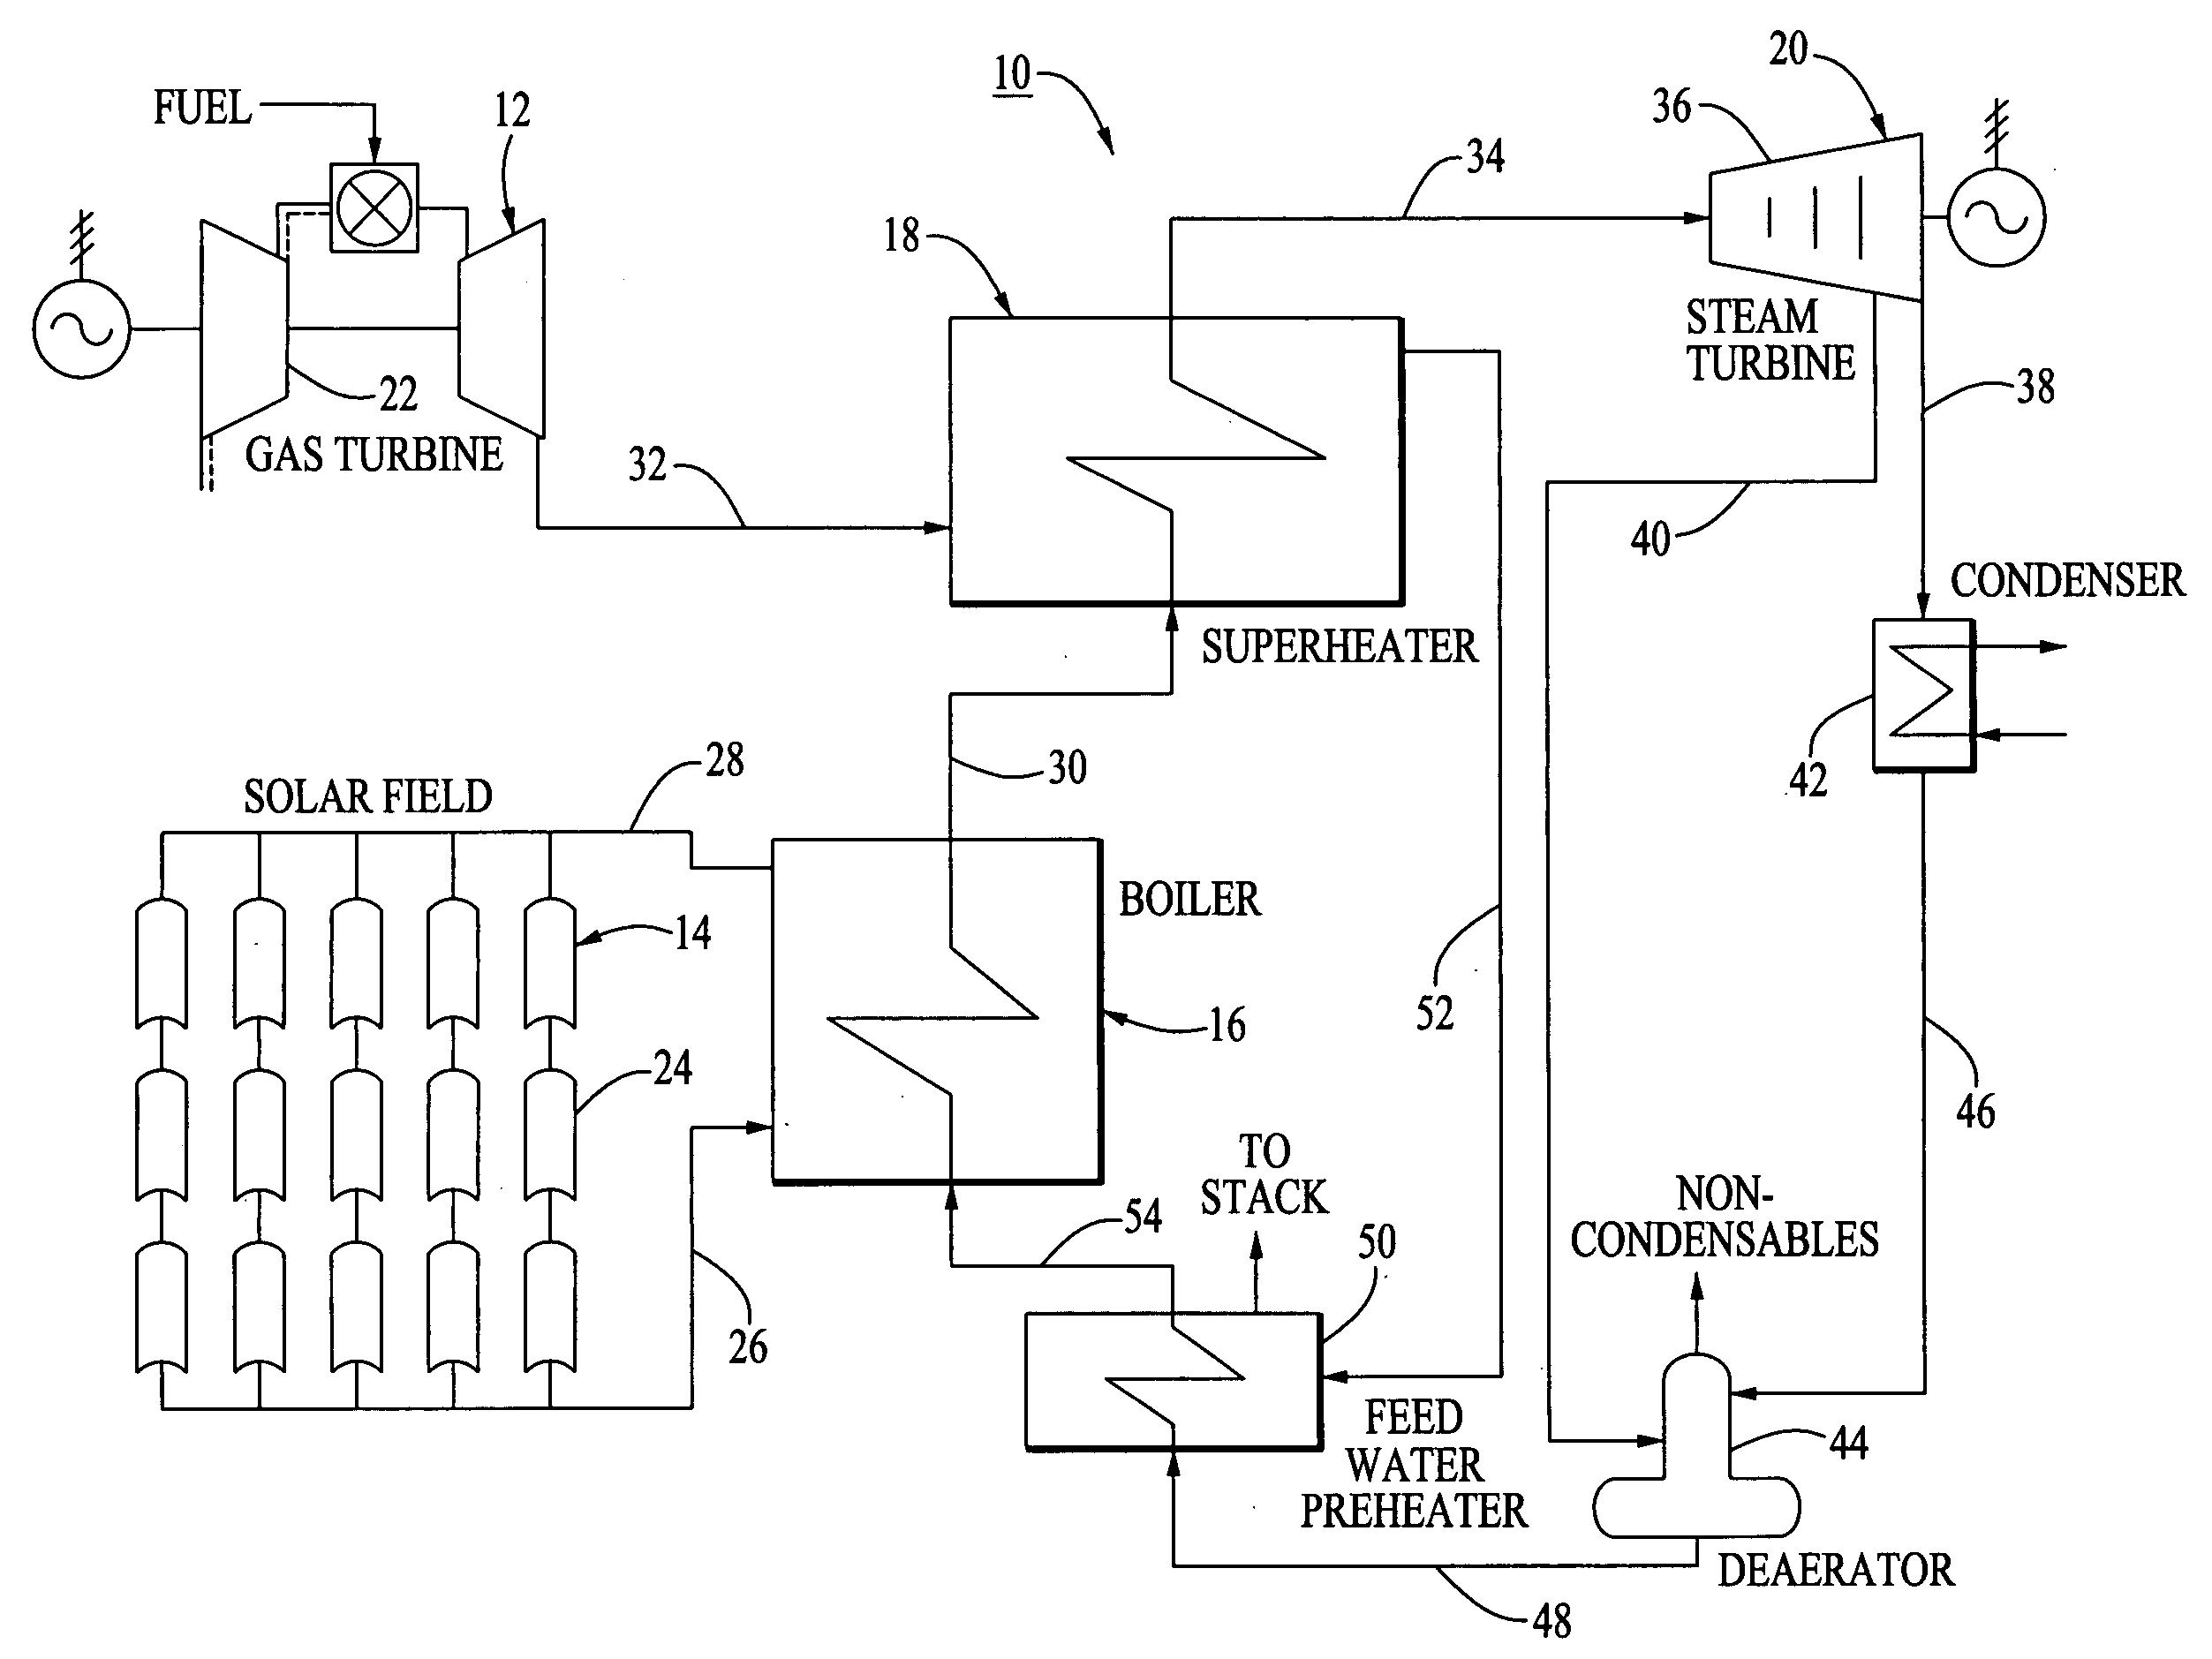 Electrical generating system using solar energy and gas turbine